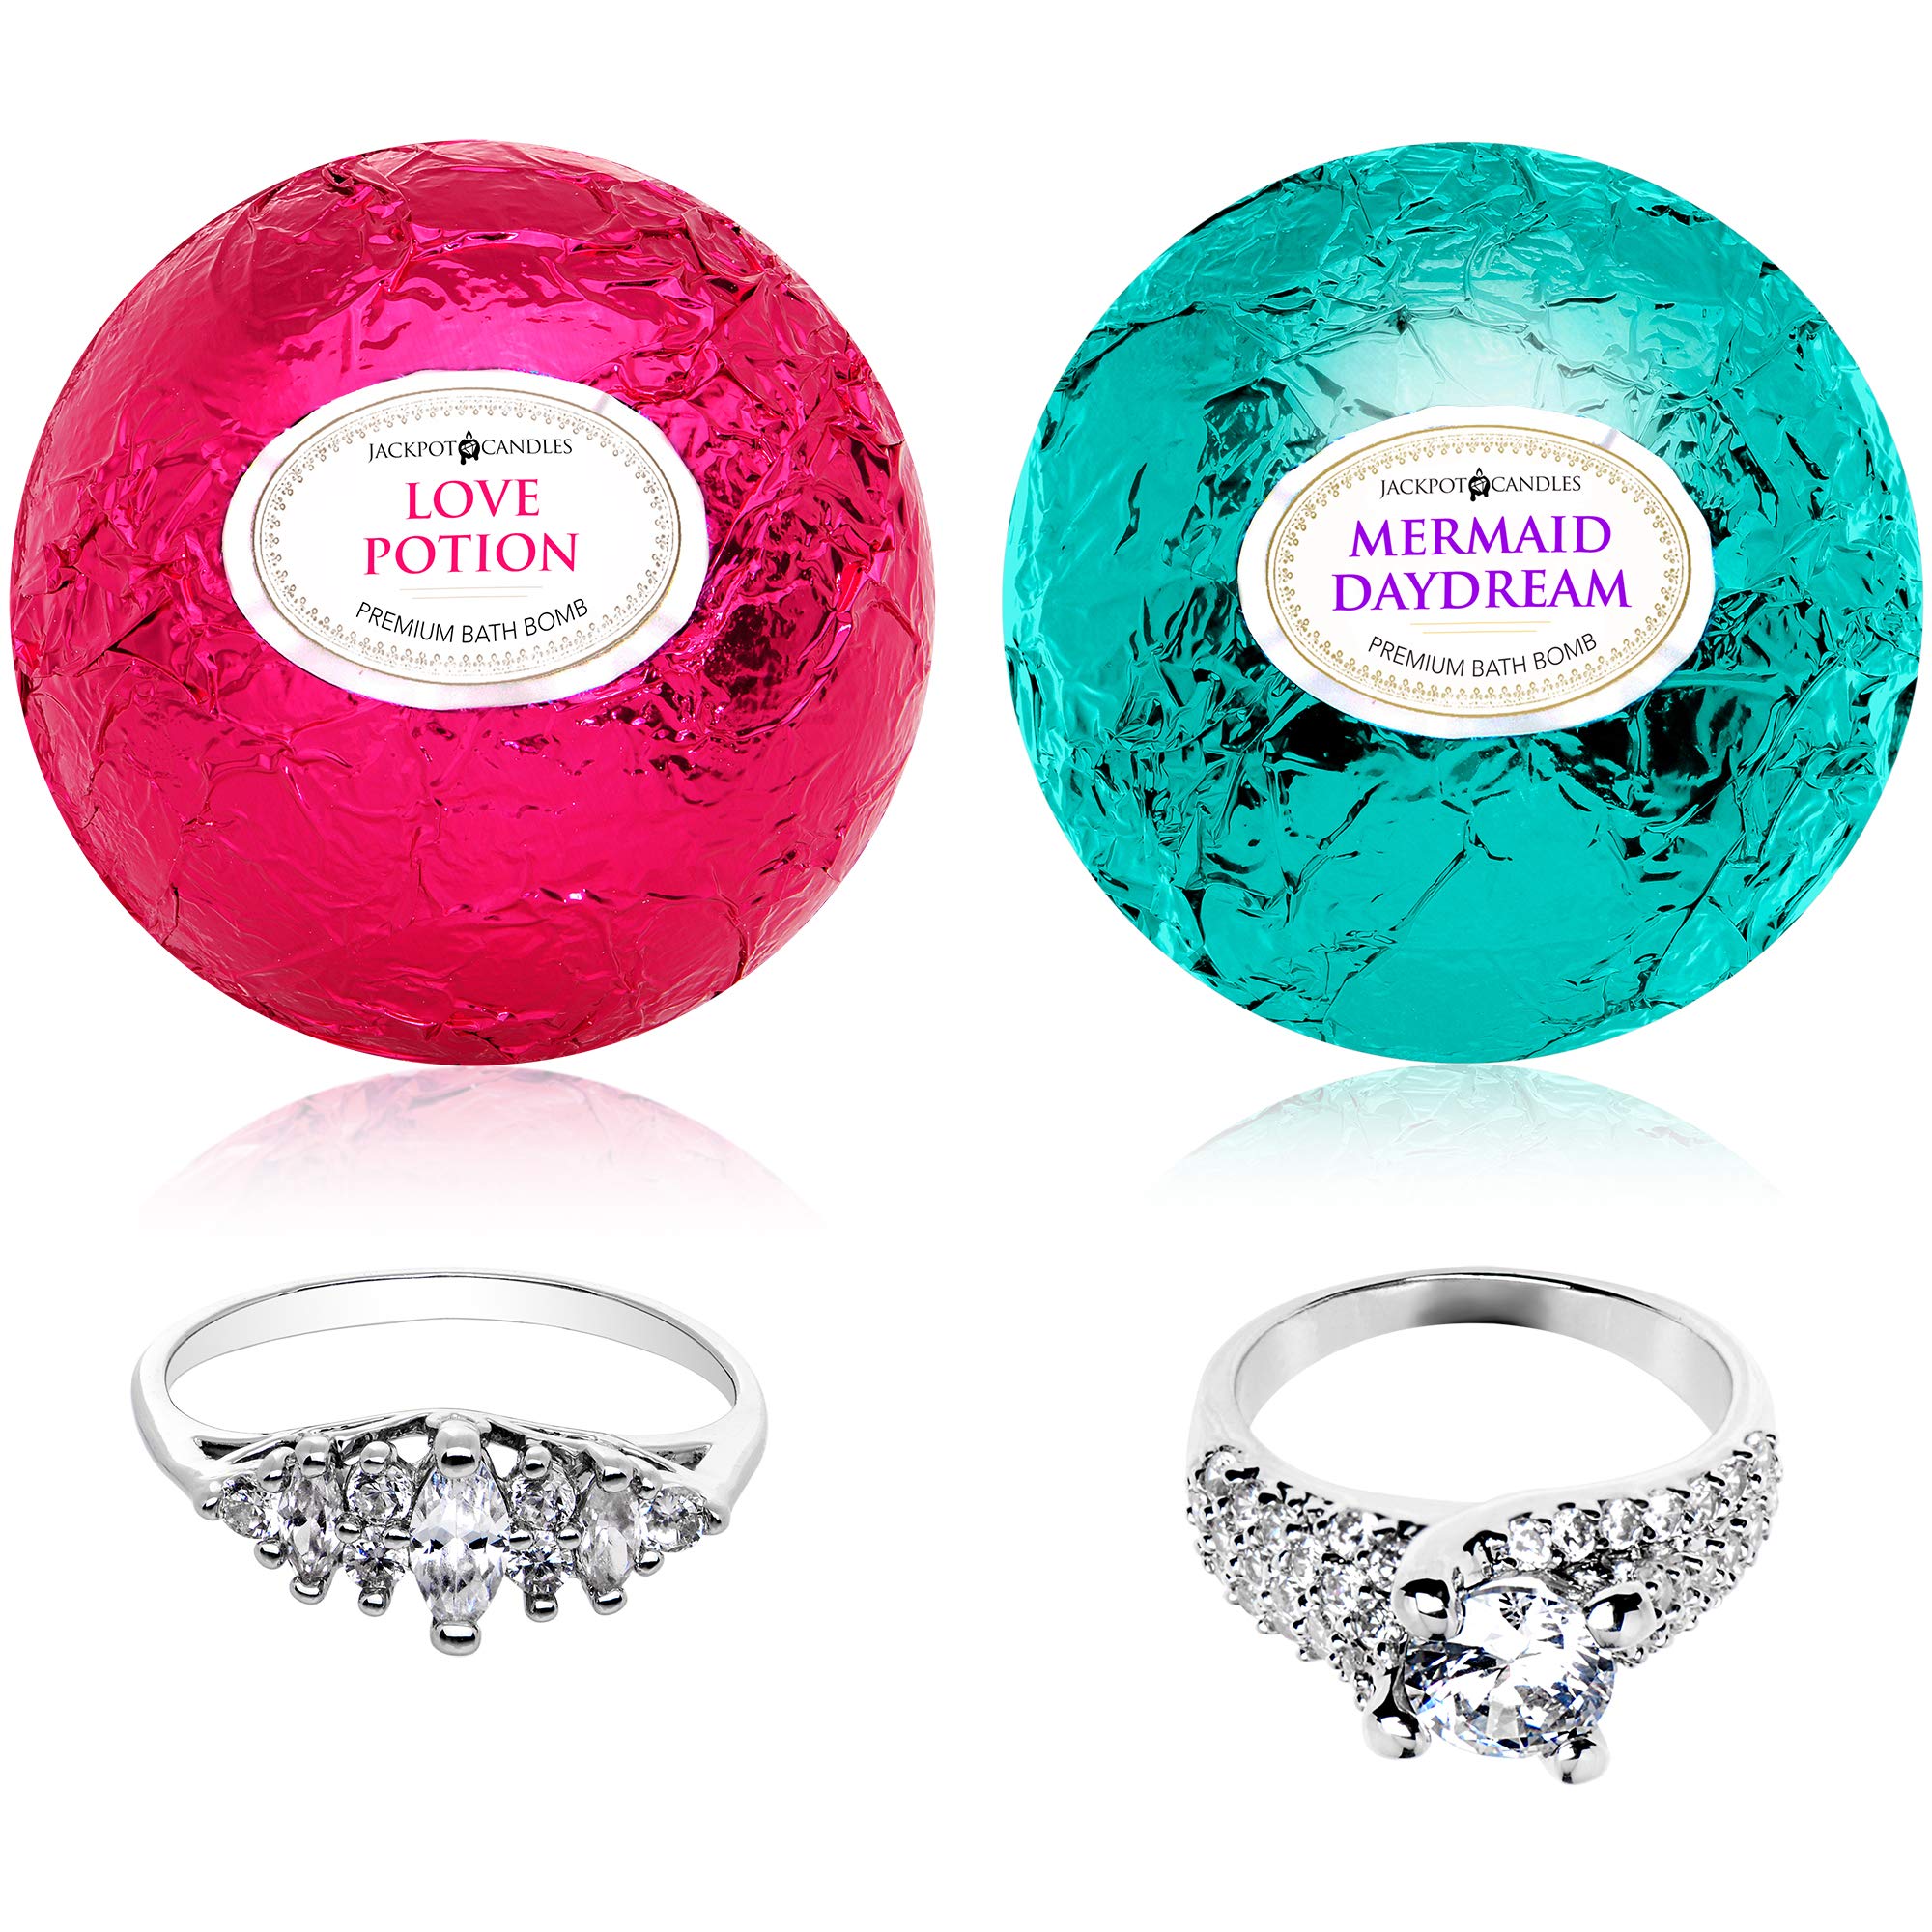 Mermaid Love Potion Bath Bombs Gift Set of 2 with Ring Surprise Inside Each Made in USA